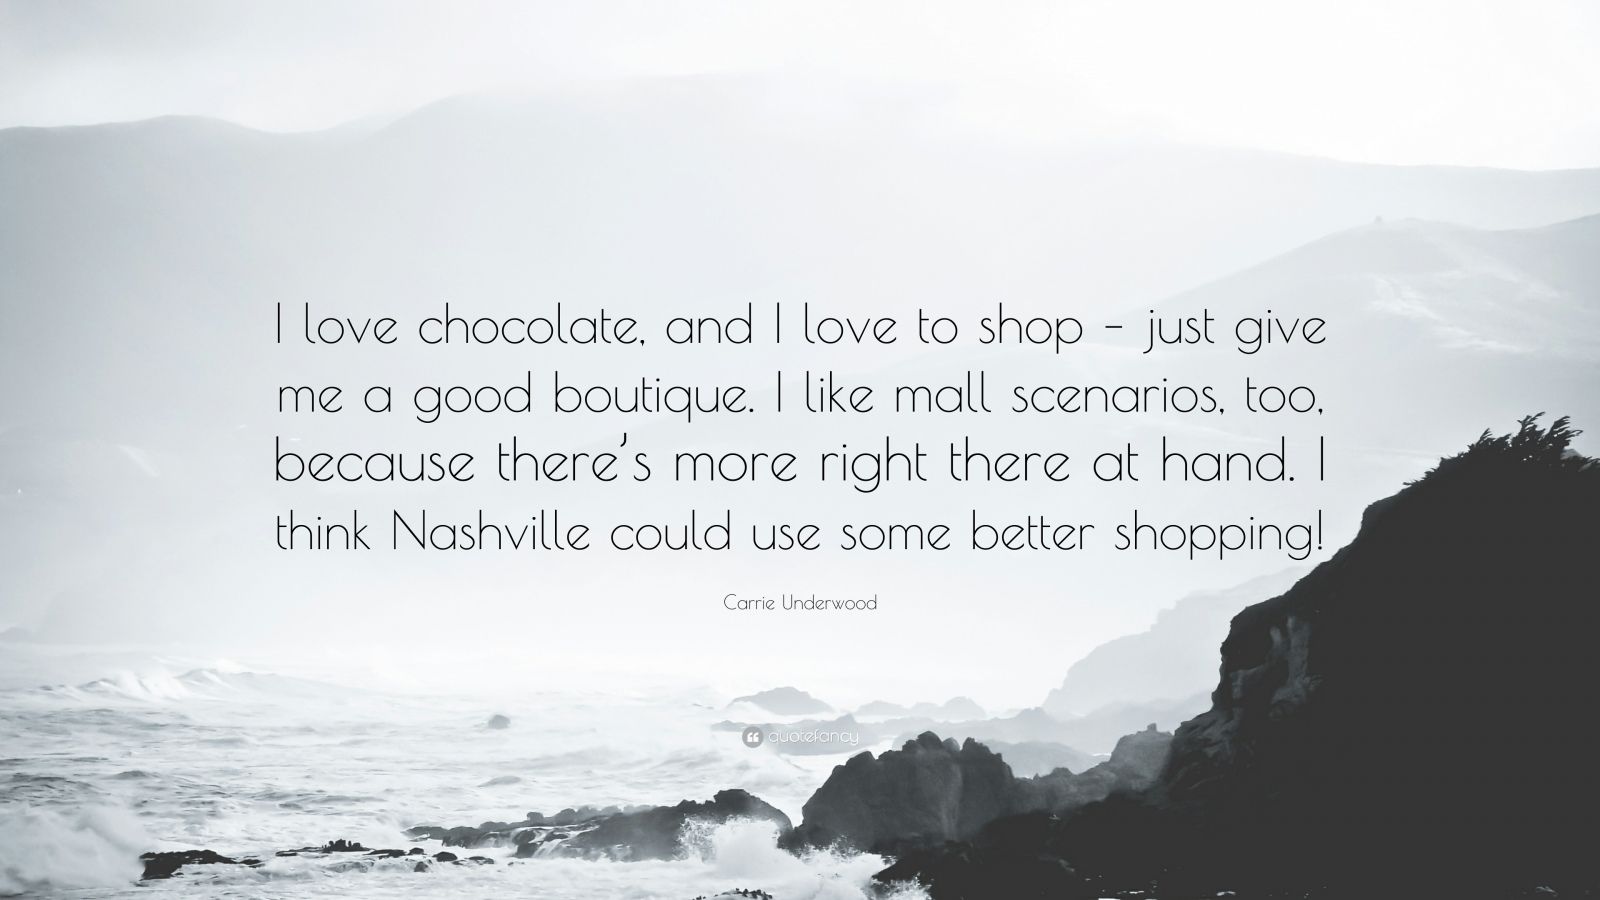 Carrie Underwood Quote “I love chocolate and I love to shop – just